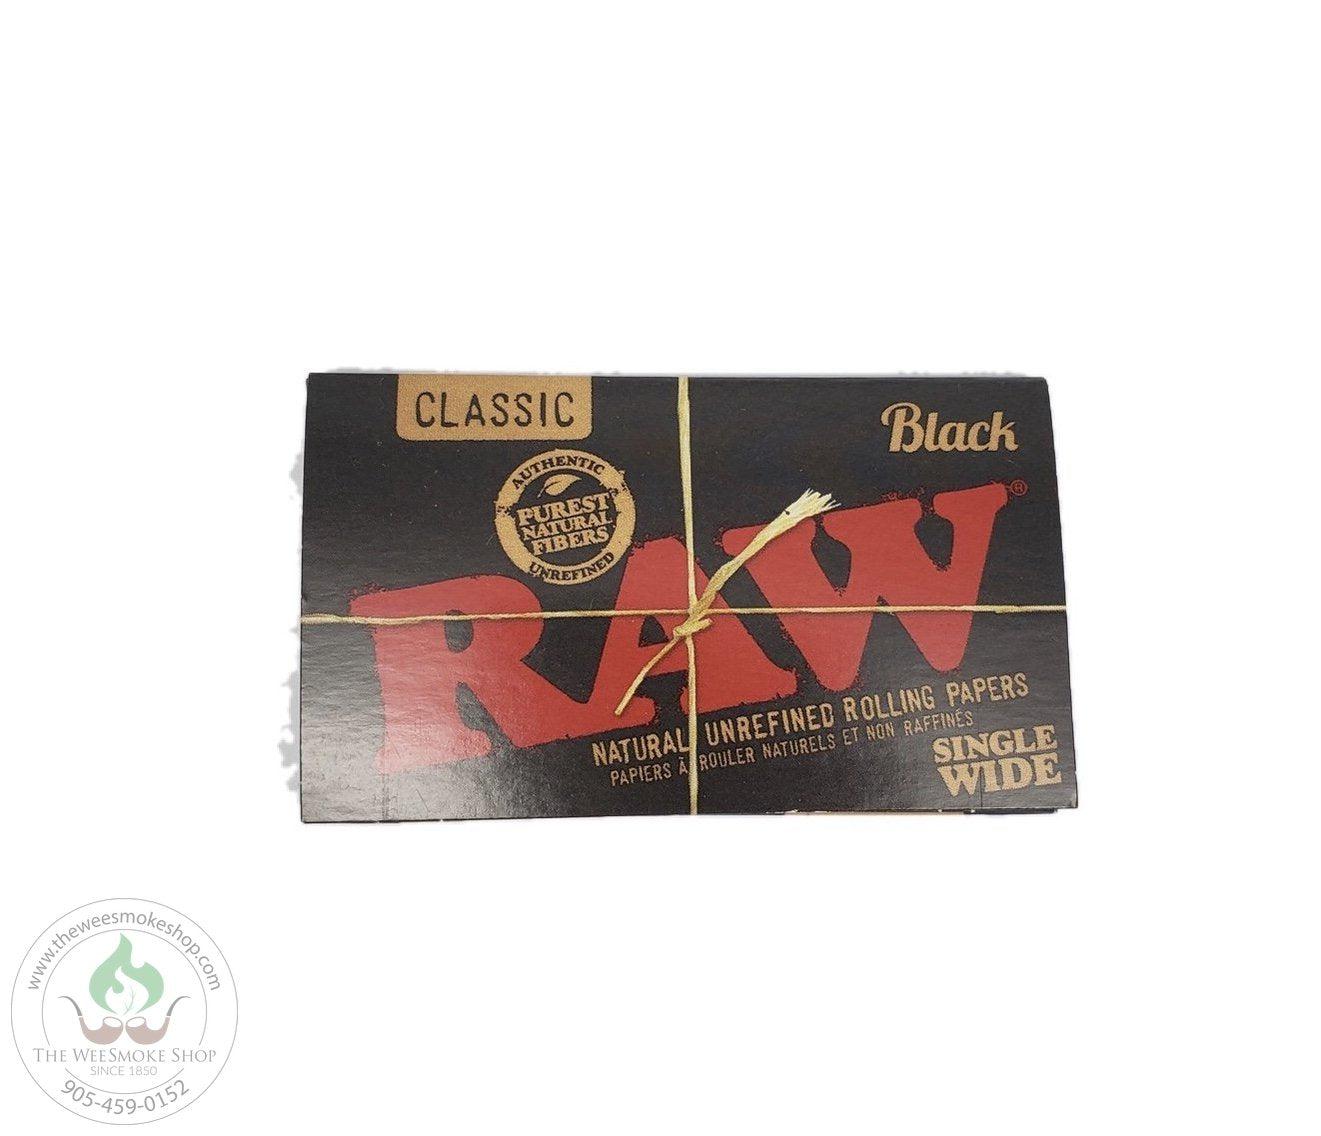 RAW Black Rolling Papers. Single Wide Double Window. The Wee Smoke Shop